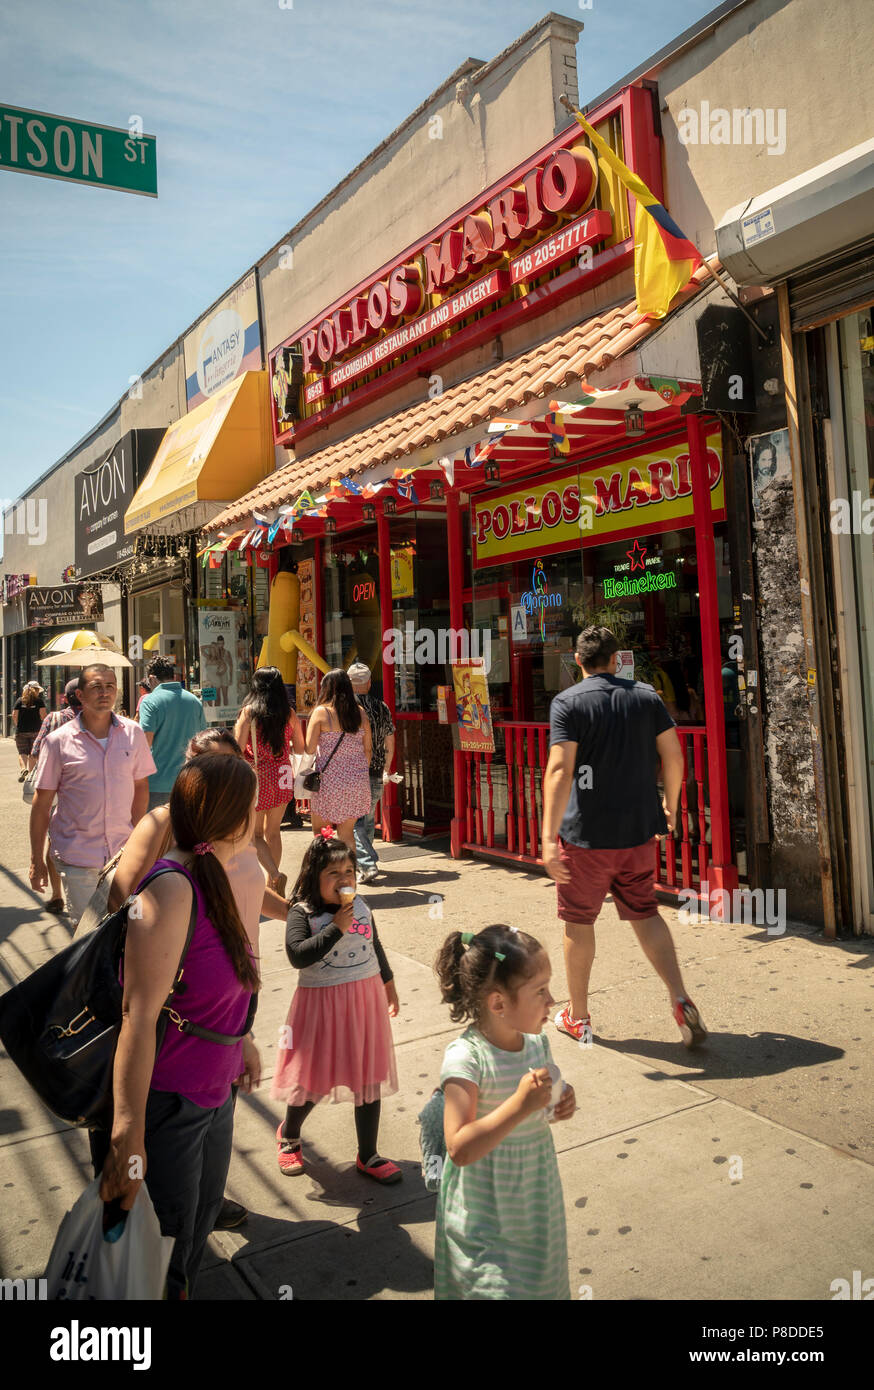 Colombian chicken restaurant in the busy Jackson Heights neighborhood in Queens in New York on Sunday, July 8, 2018. The Jackson Heights neighborhood is home to a mosaic of ethnic groups  which include Hispanics, Indians, Pakistanis, Tibetans, Southeast Asian as well as long-time Jewish and Italian residents.  (Â© Richard B. Levine) Stock Photo